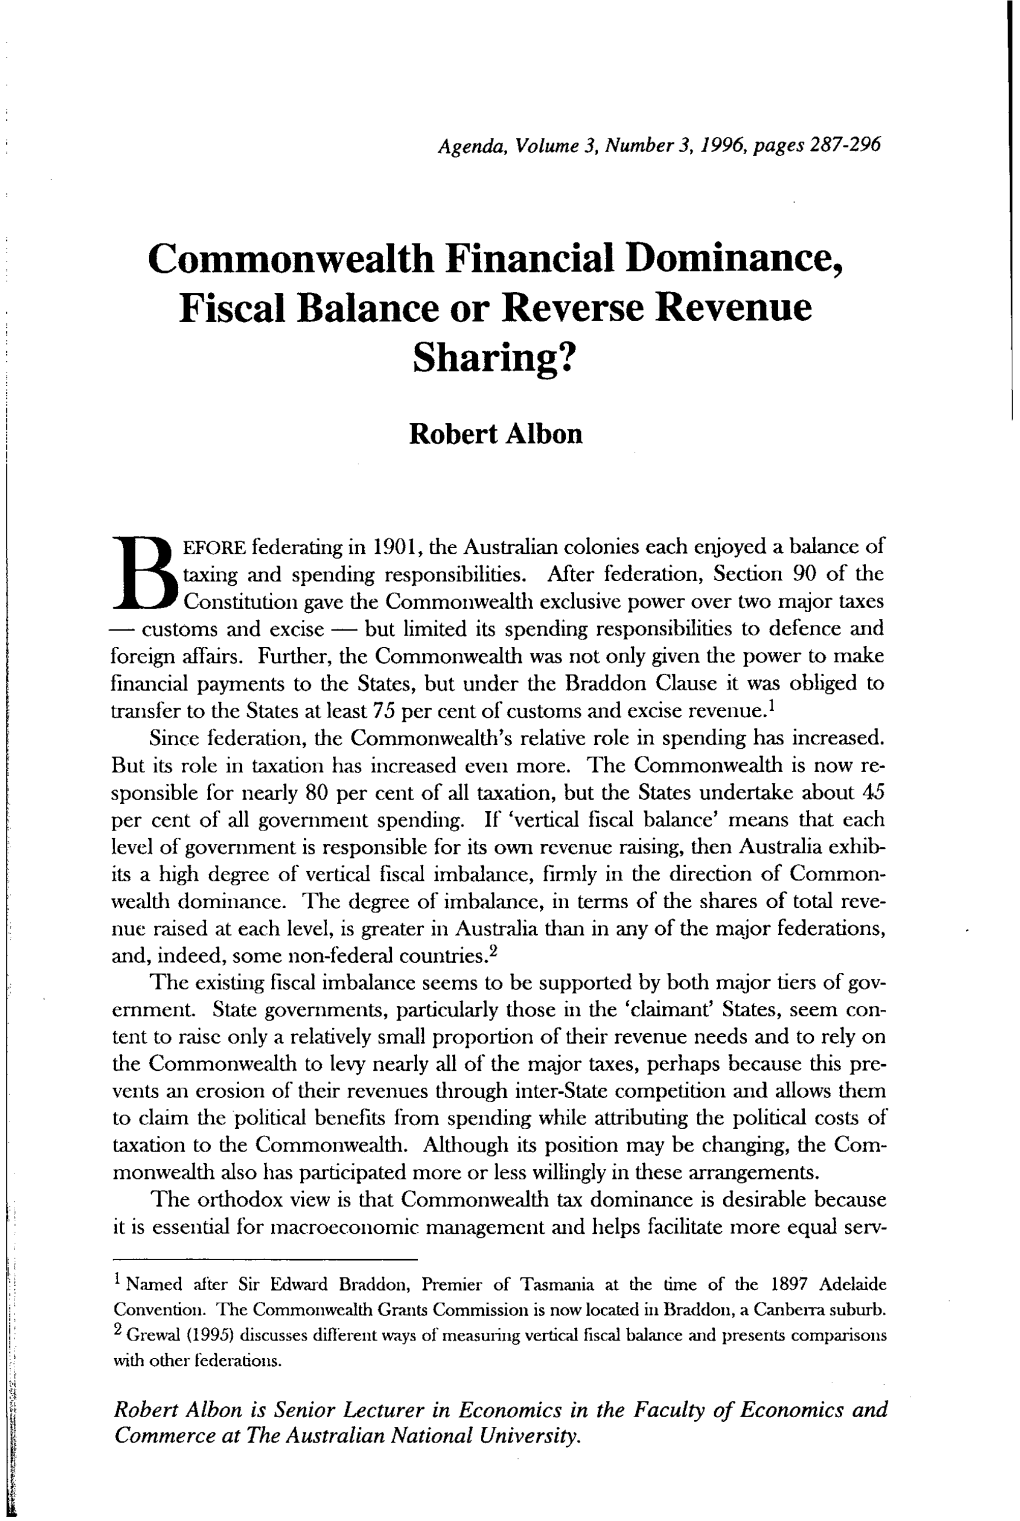 Commonwealth Financial Dominance, Fiscal Balance Or Reverse Revenue Sharing?